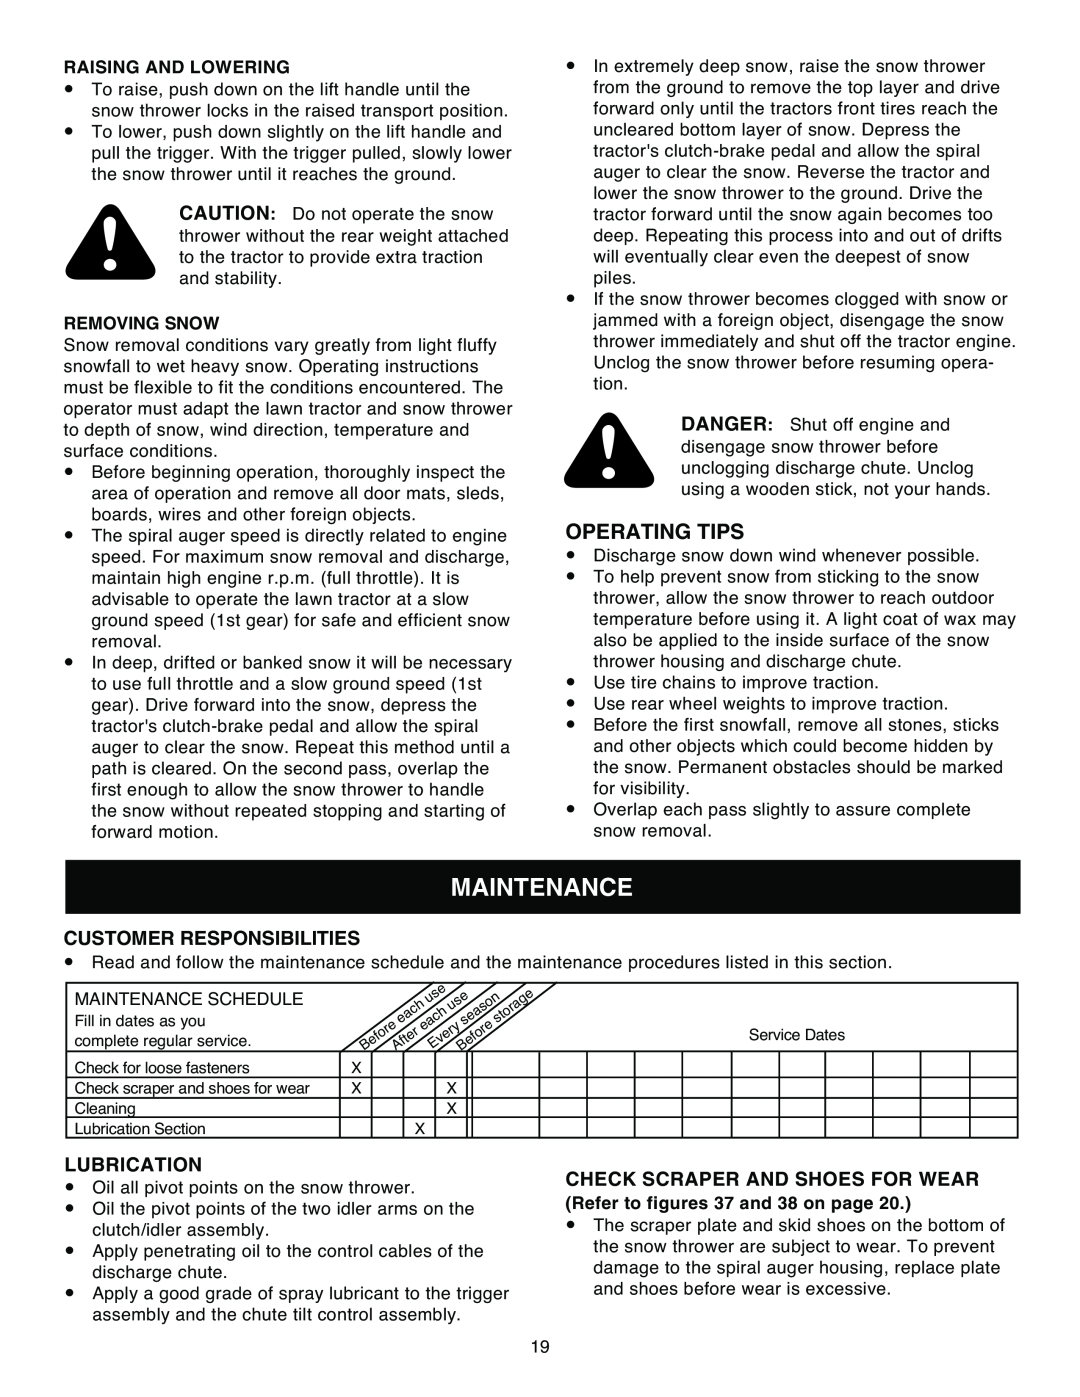 Sears 486.248392 Maintenance, Operating Tips, Customer Responsibilities, Lubrication, Check Scraper And Shoes For Wear 